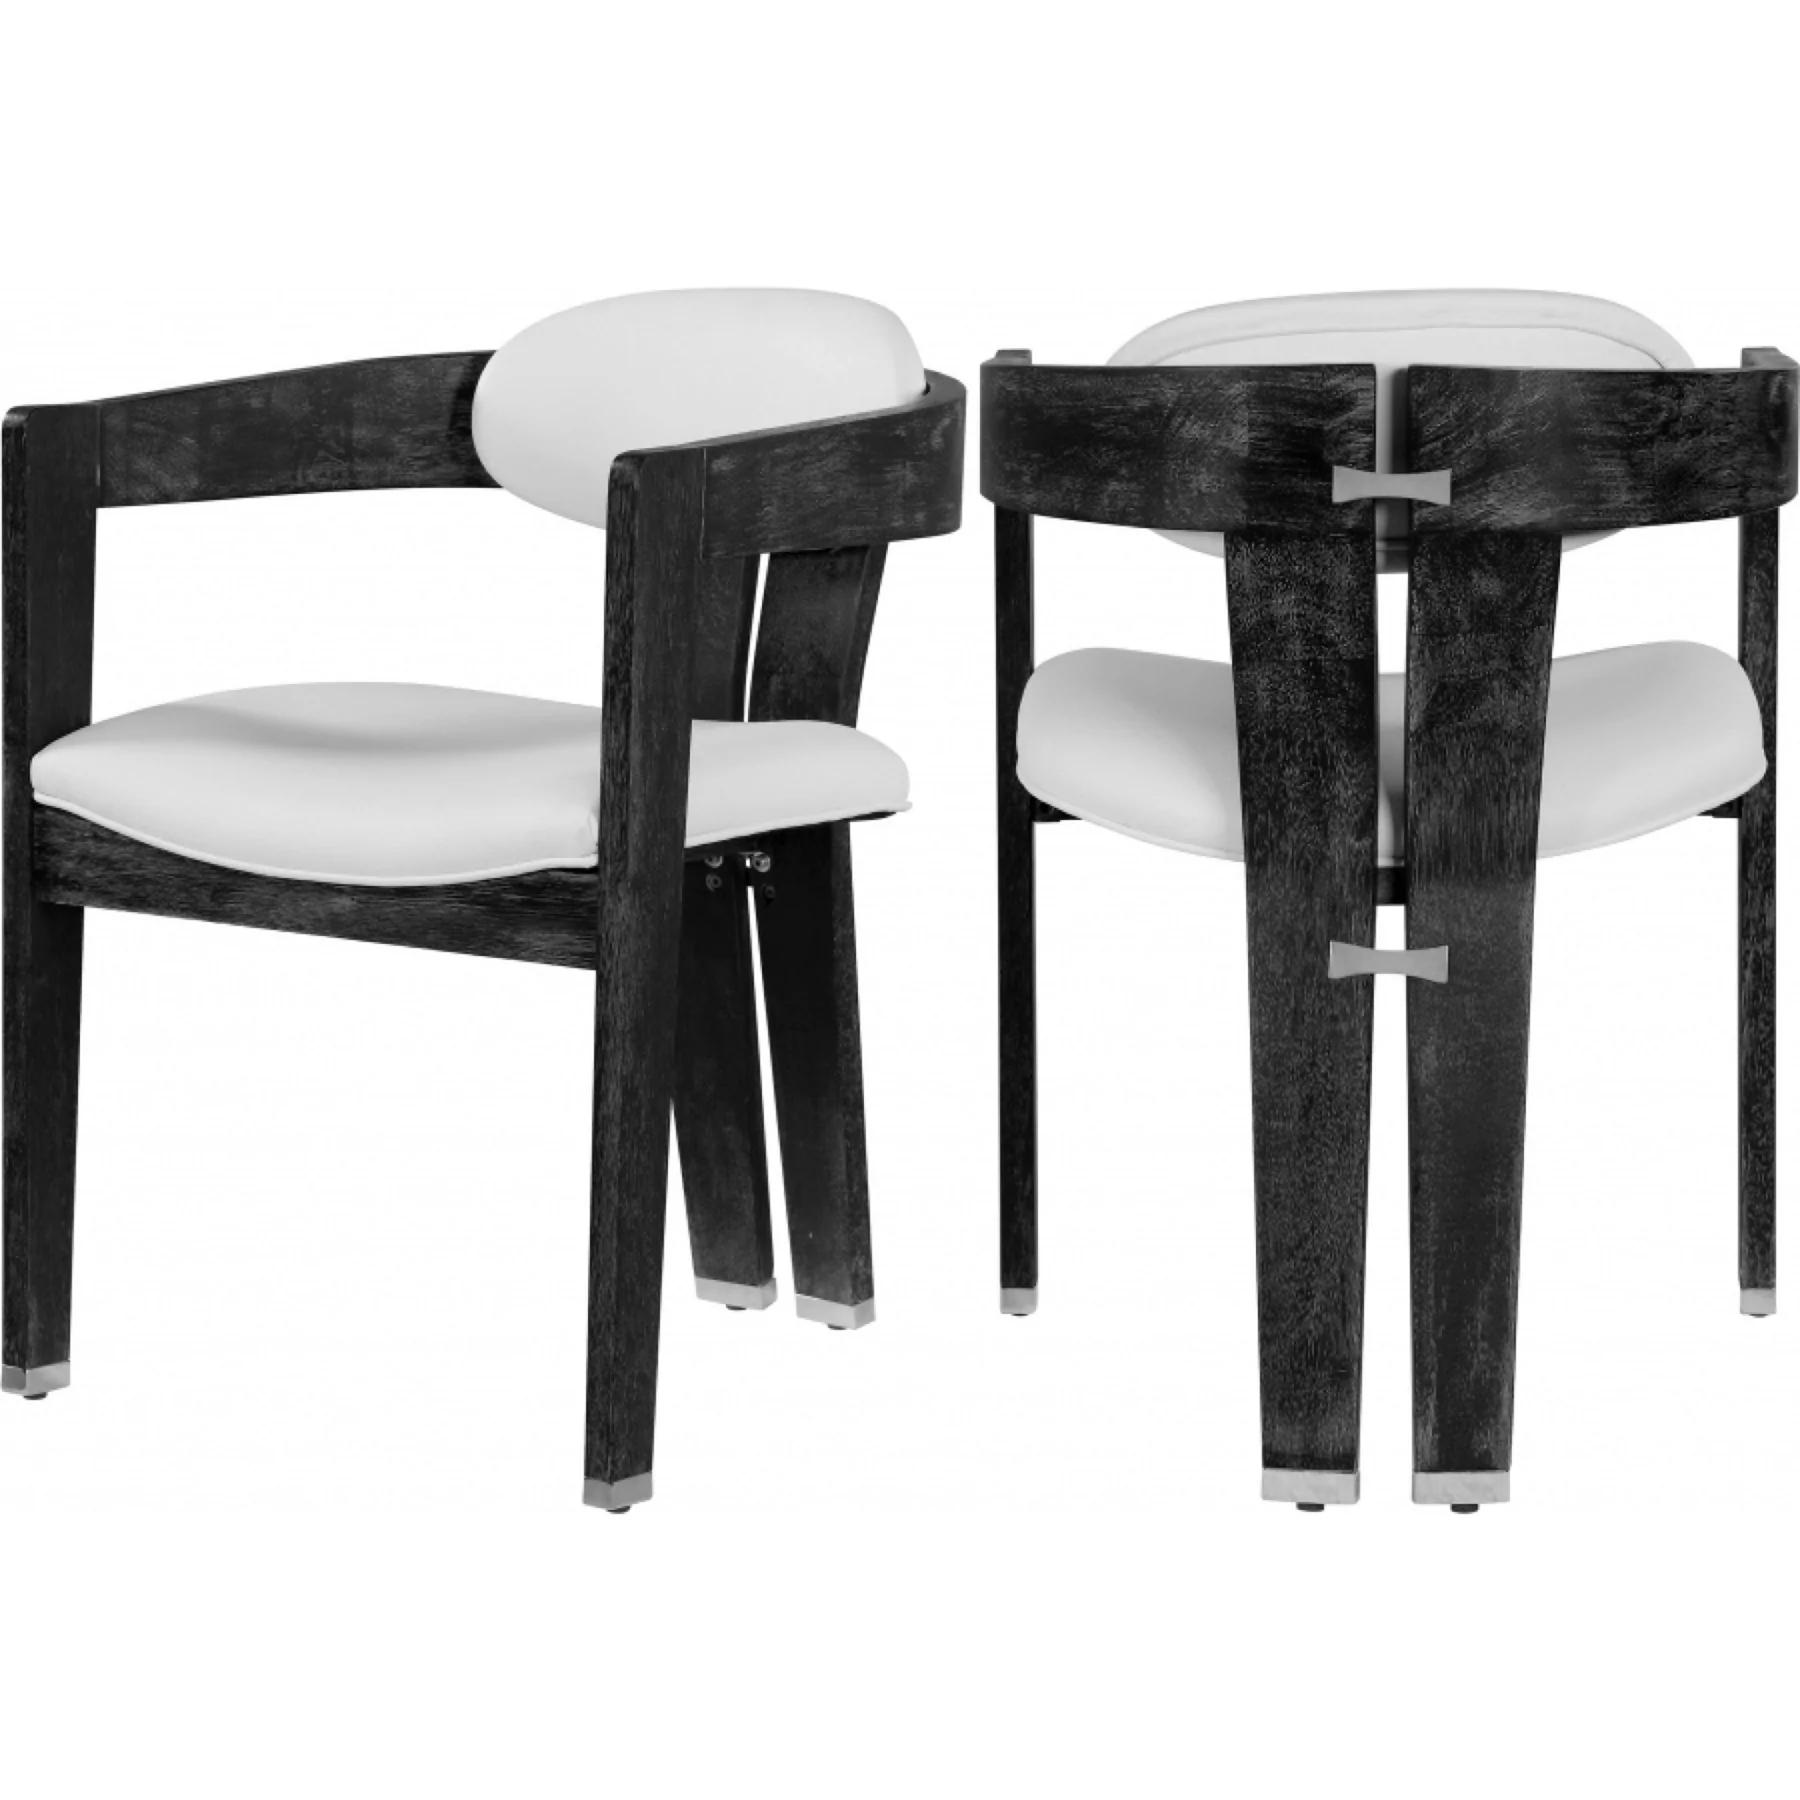 Modern Dining Chair Set Thorne VGCS-ACH-21087 in Cream, Wenge Leatherette